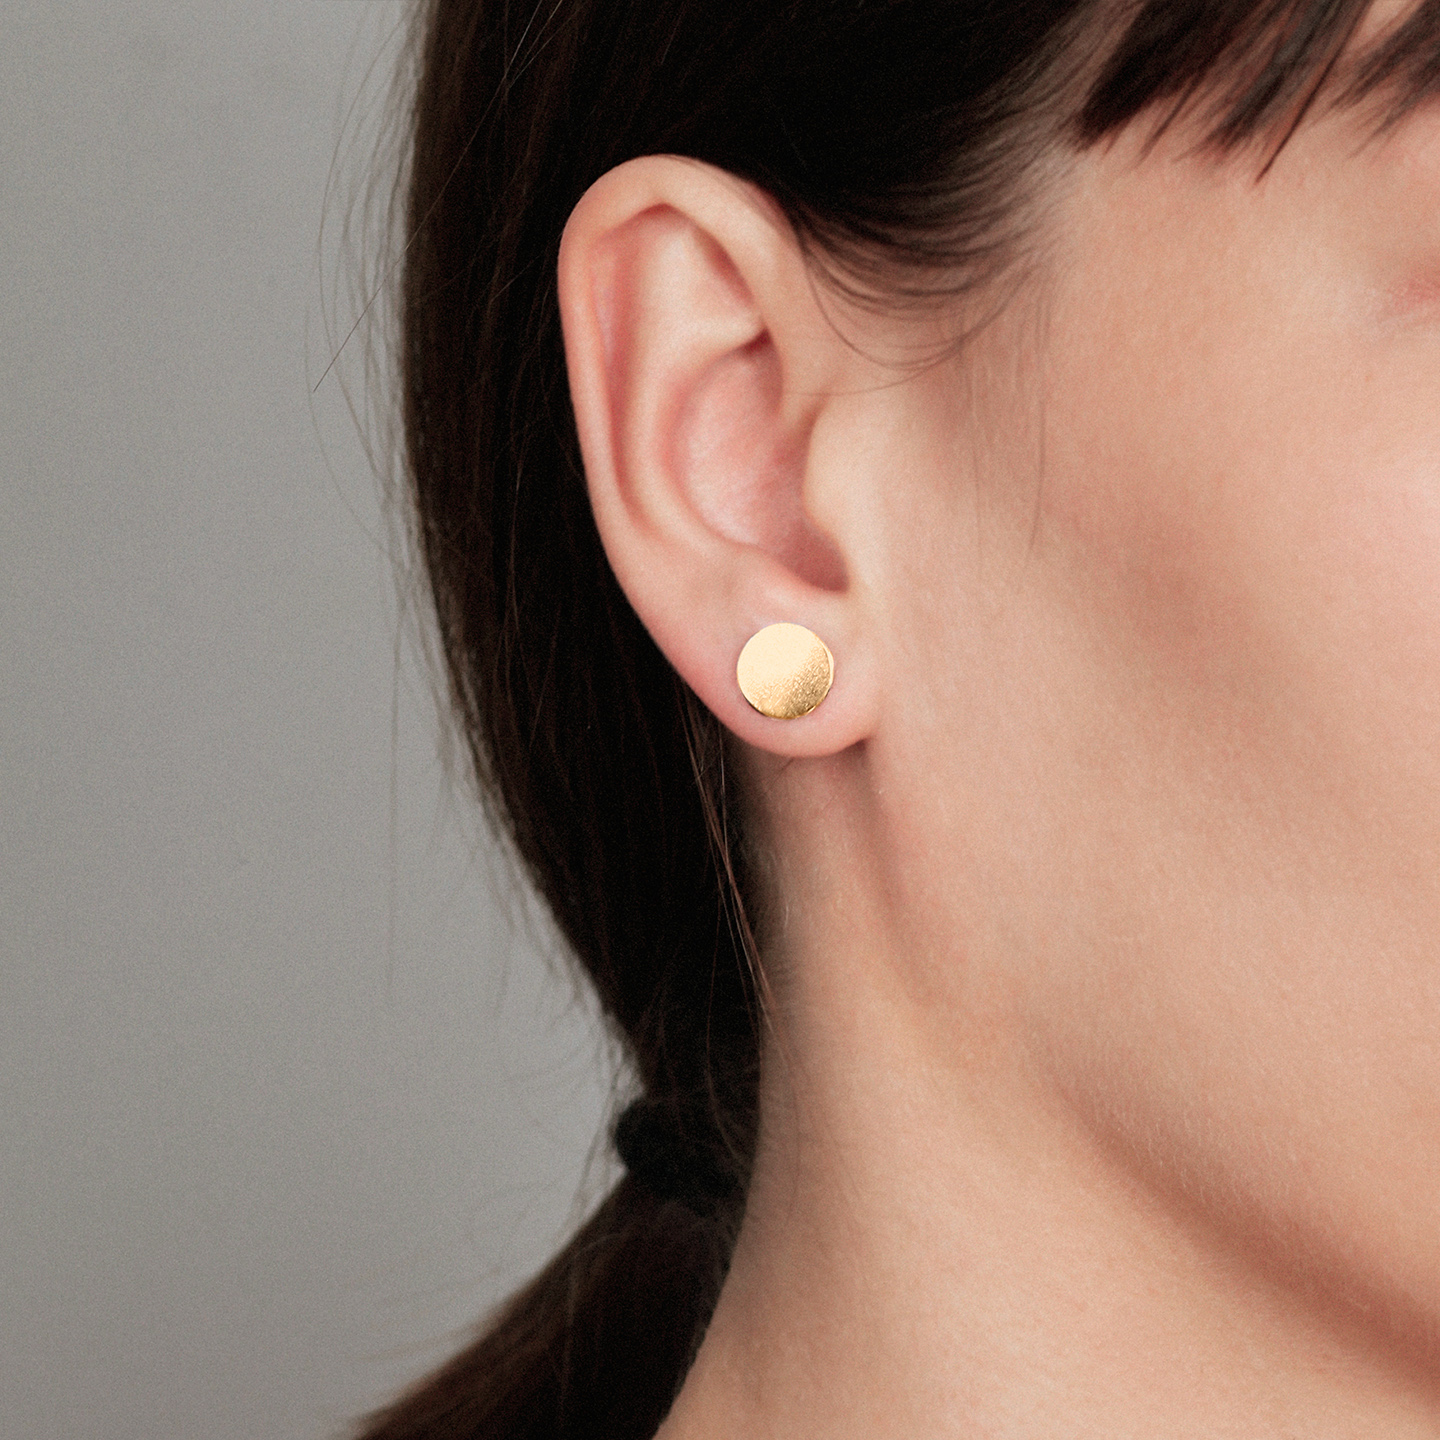 Gold earring with false dilation